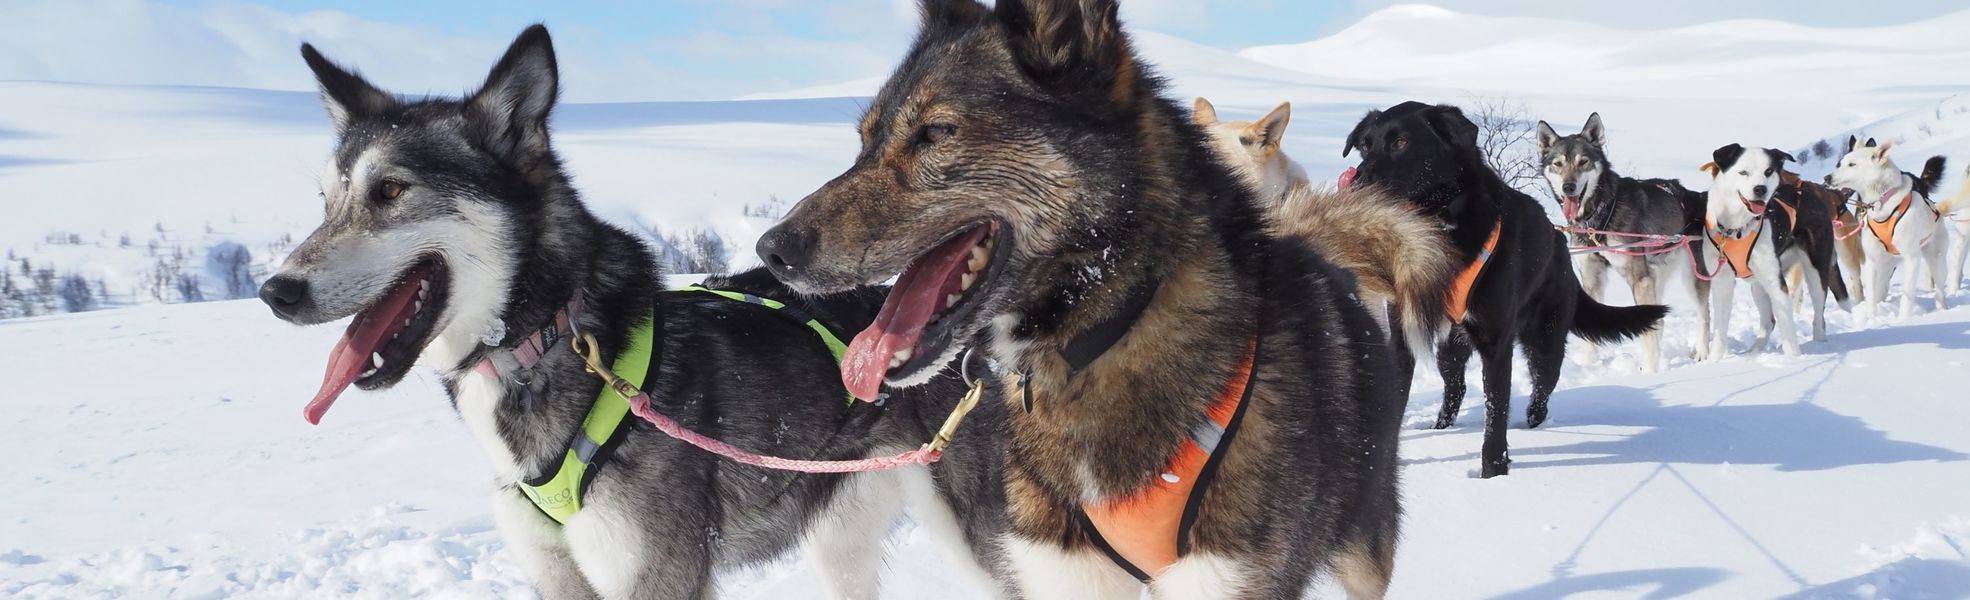 Huskies in Lapland - volunteering with dogs and cats